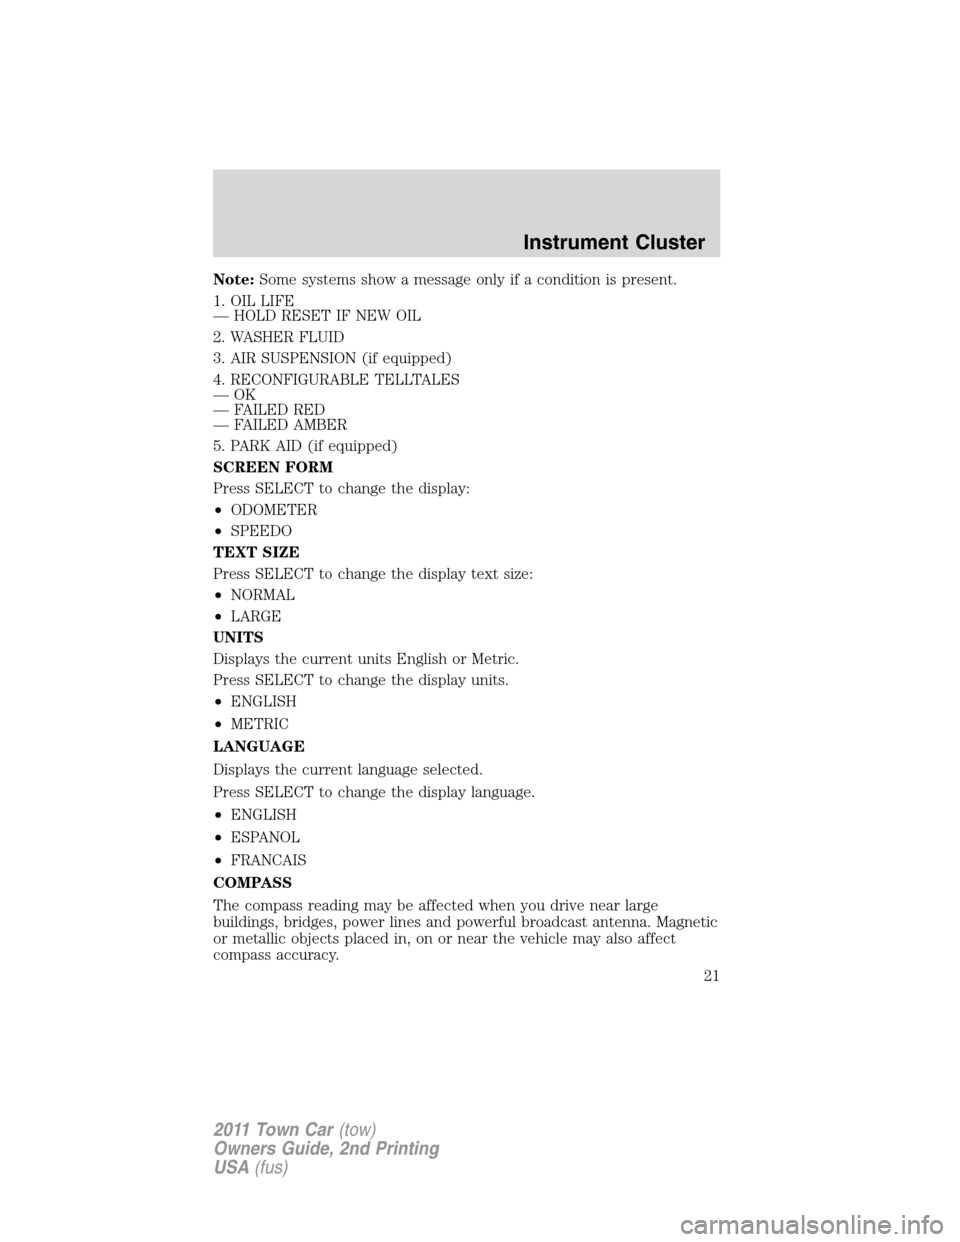 LINCOLN TOWN CAR 2011  Owners Manual Note:Some systems show a message only if a condition is present.
1. OIL LIFE
— HOLD RESET IF NEW OIL
2. WASHER FLUID
3. AIR SUSPENSION (if equipped)
4. RECONFIGURABLE TELLTALES
—OK
— FAILED RED
